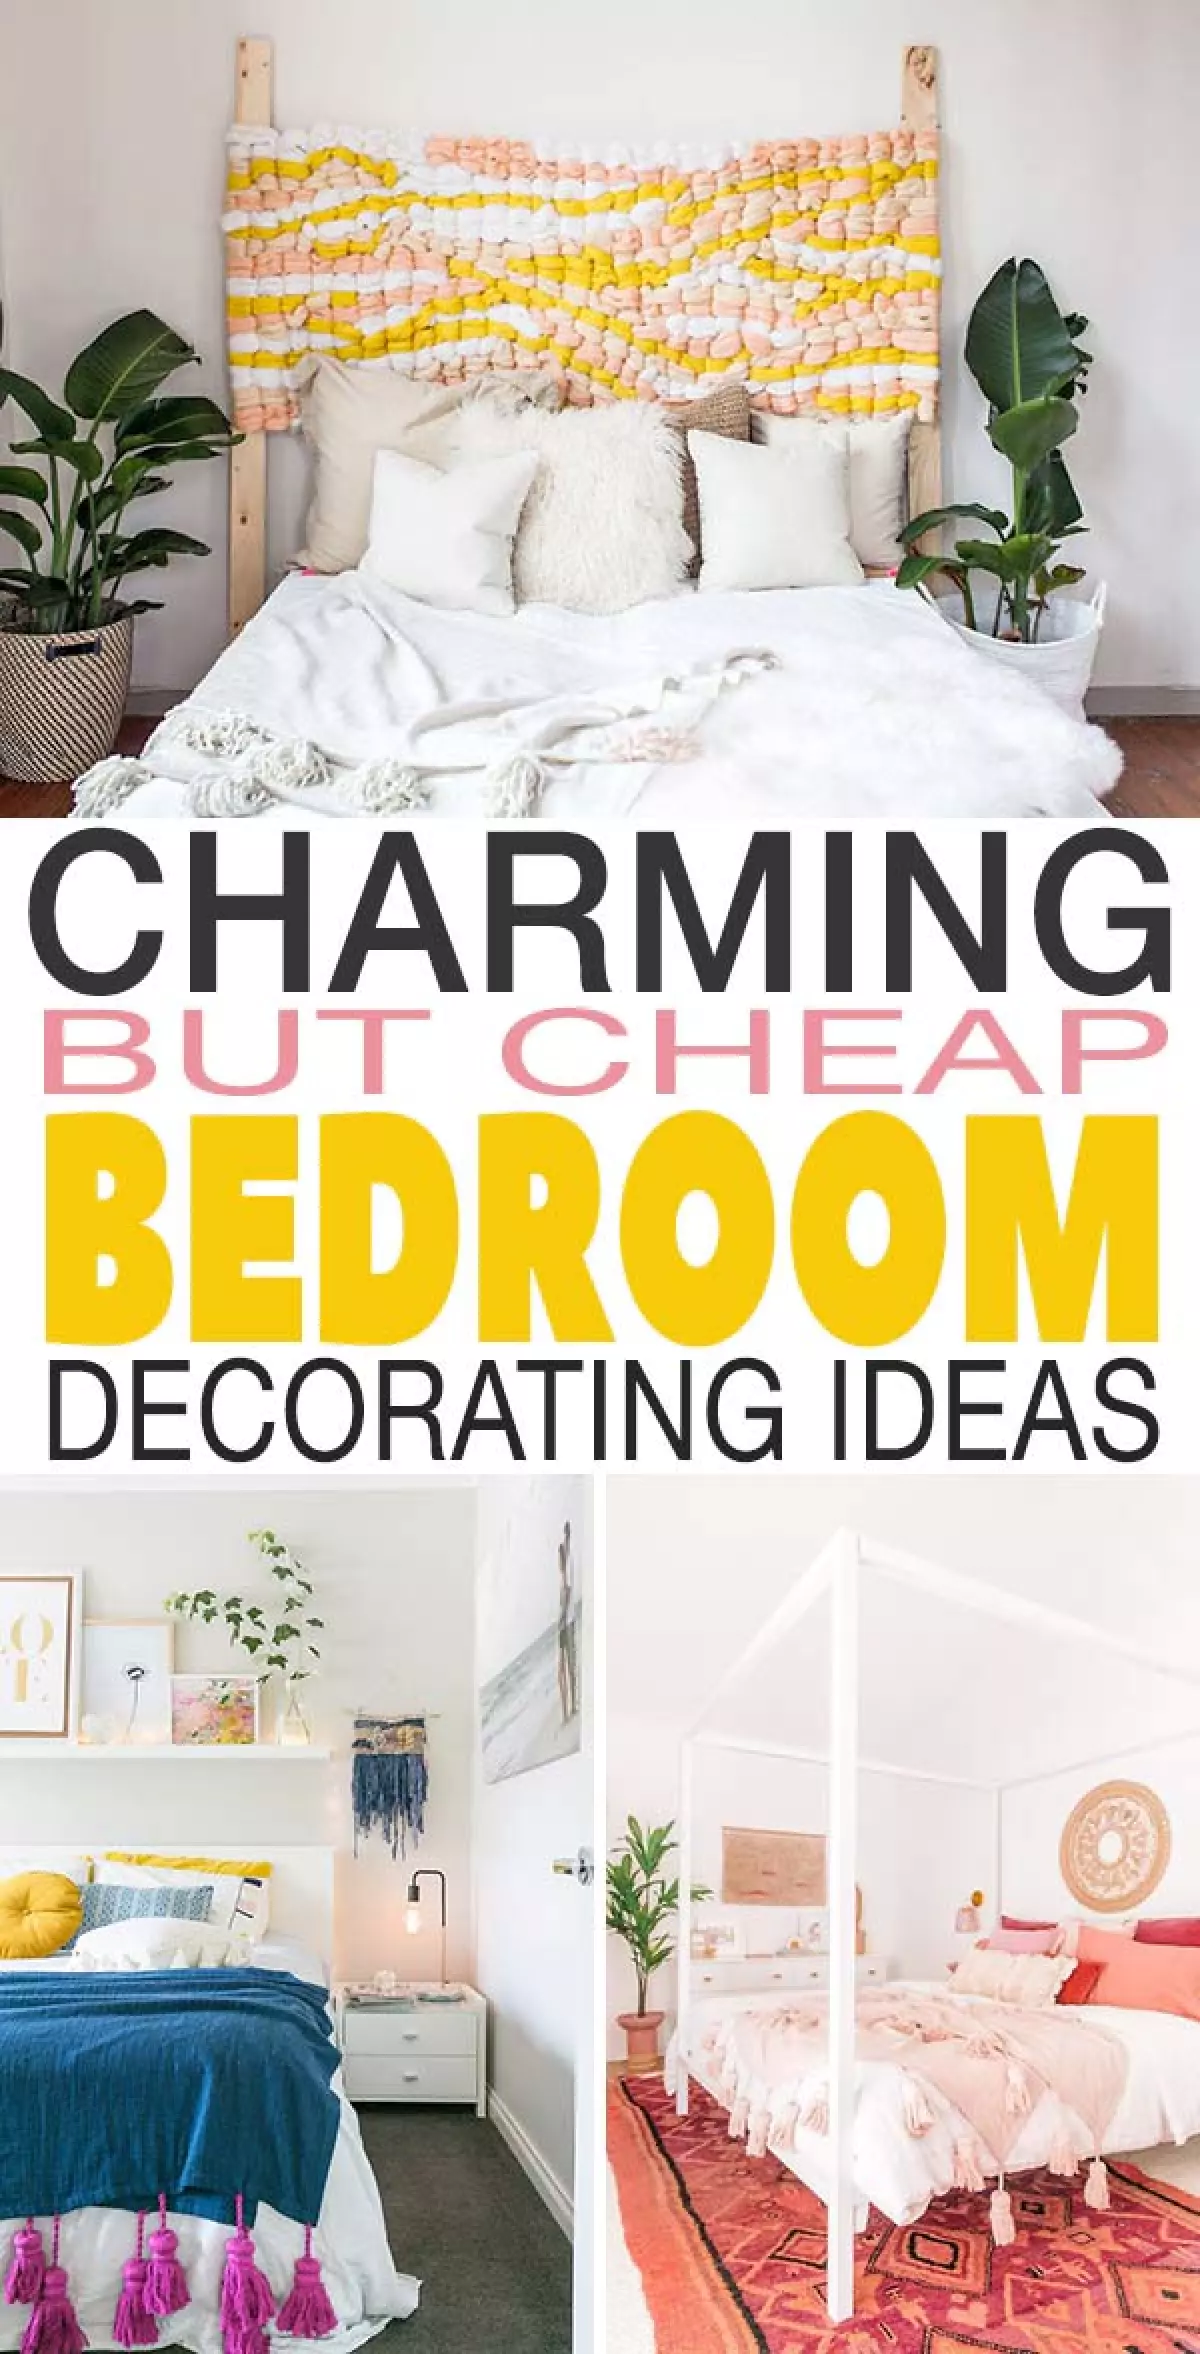 Charming But Cheap Bedroom Decorating Ideas